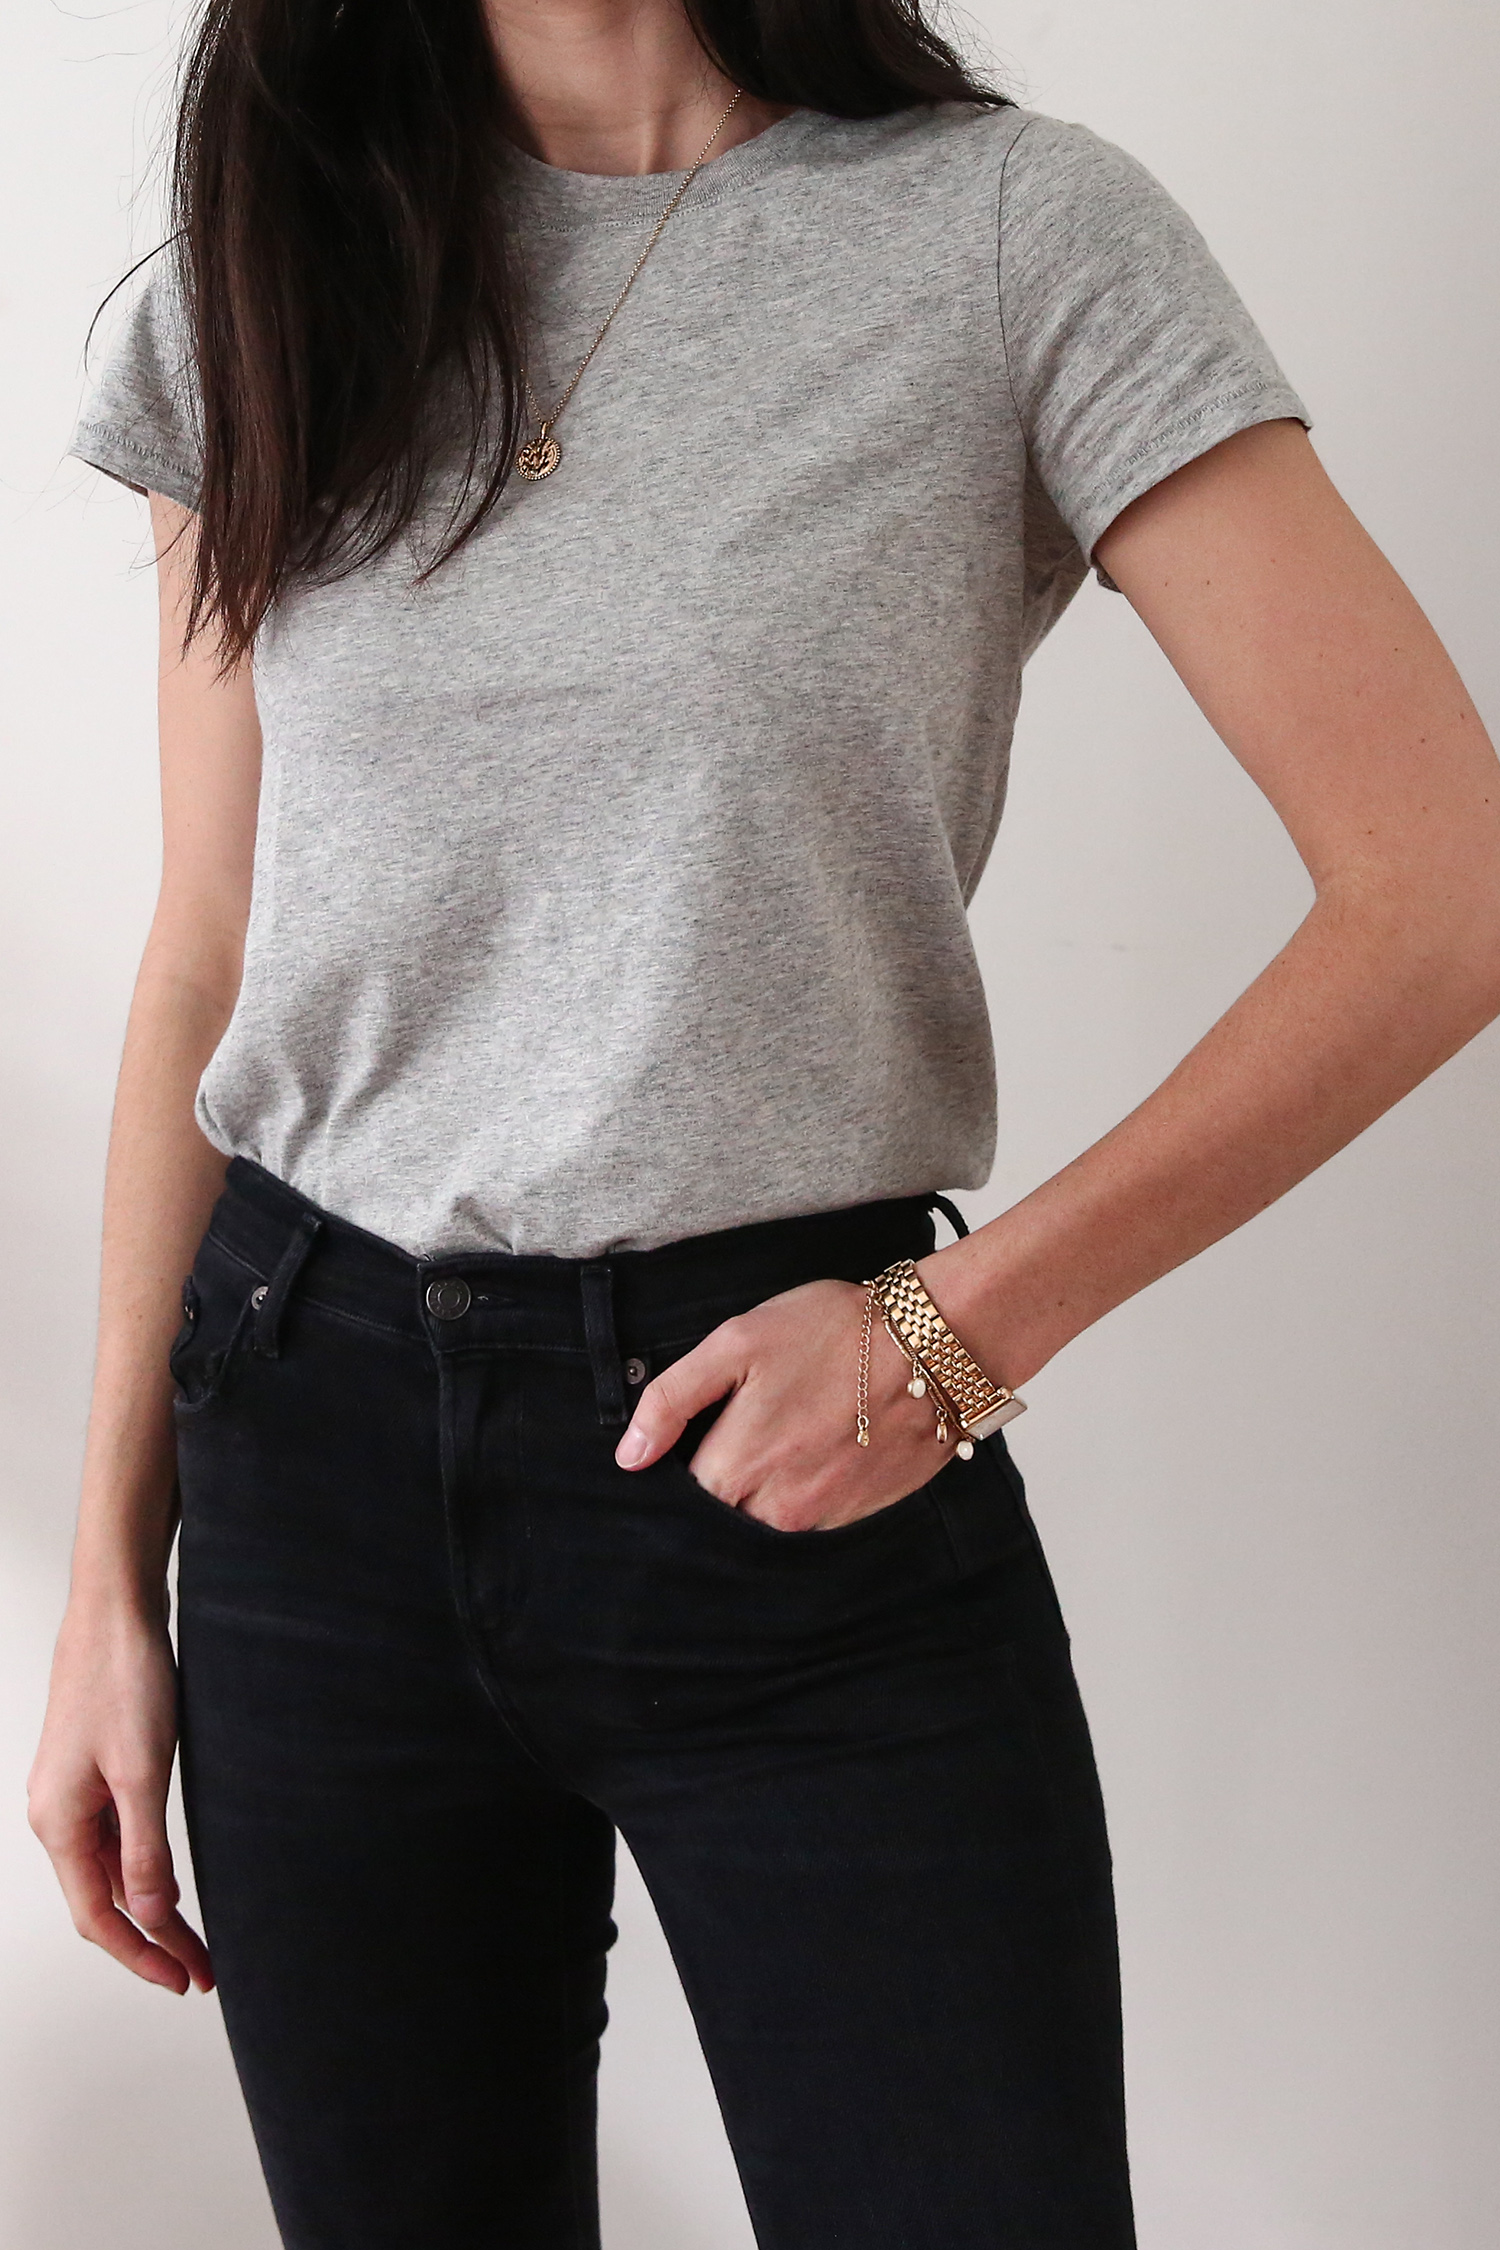 Madewell Northside Vintage Tee Review